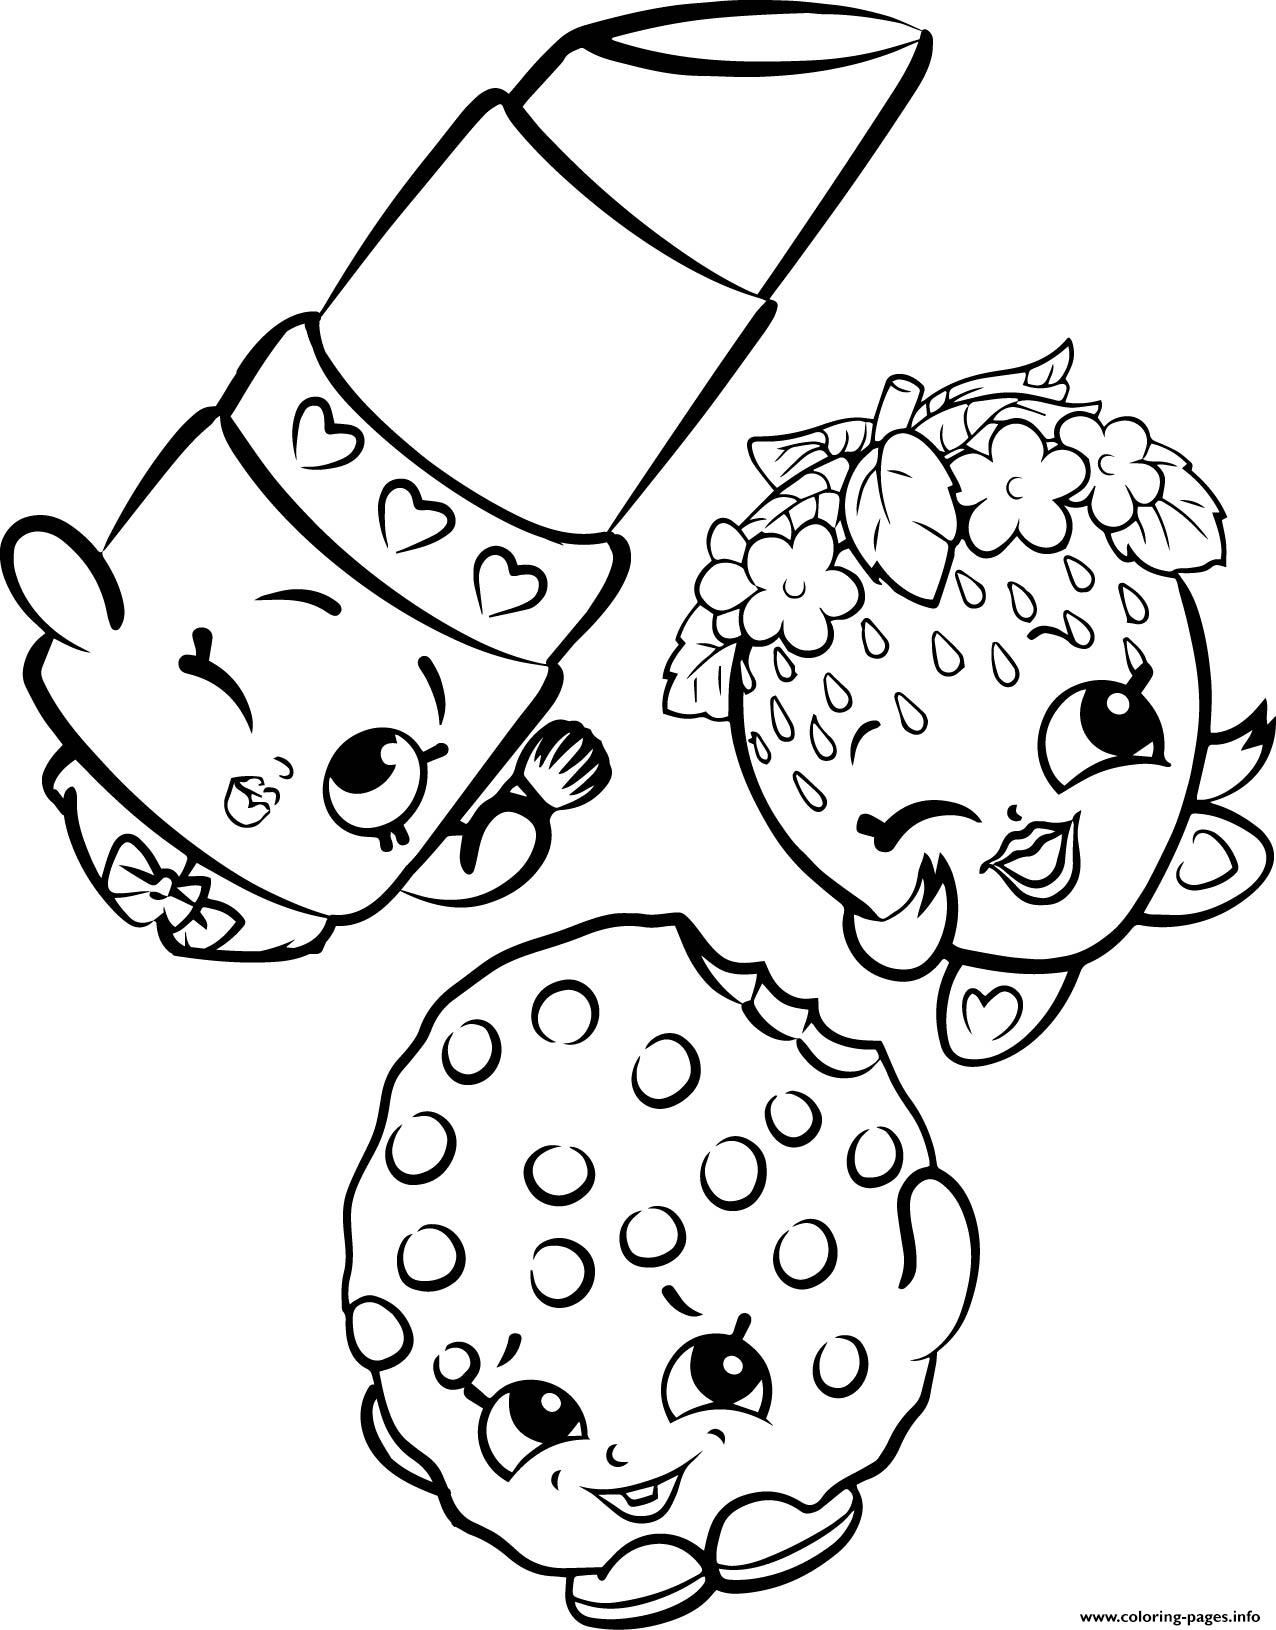 print-free-shopkins-strawberry-lipstick-cookie-coloring-pages